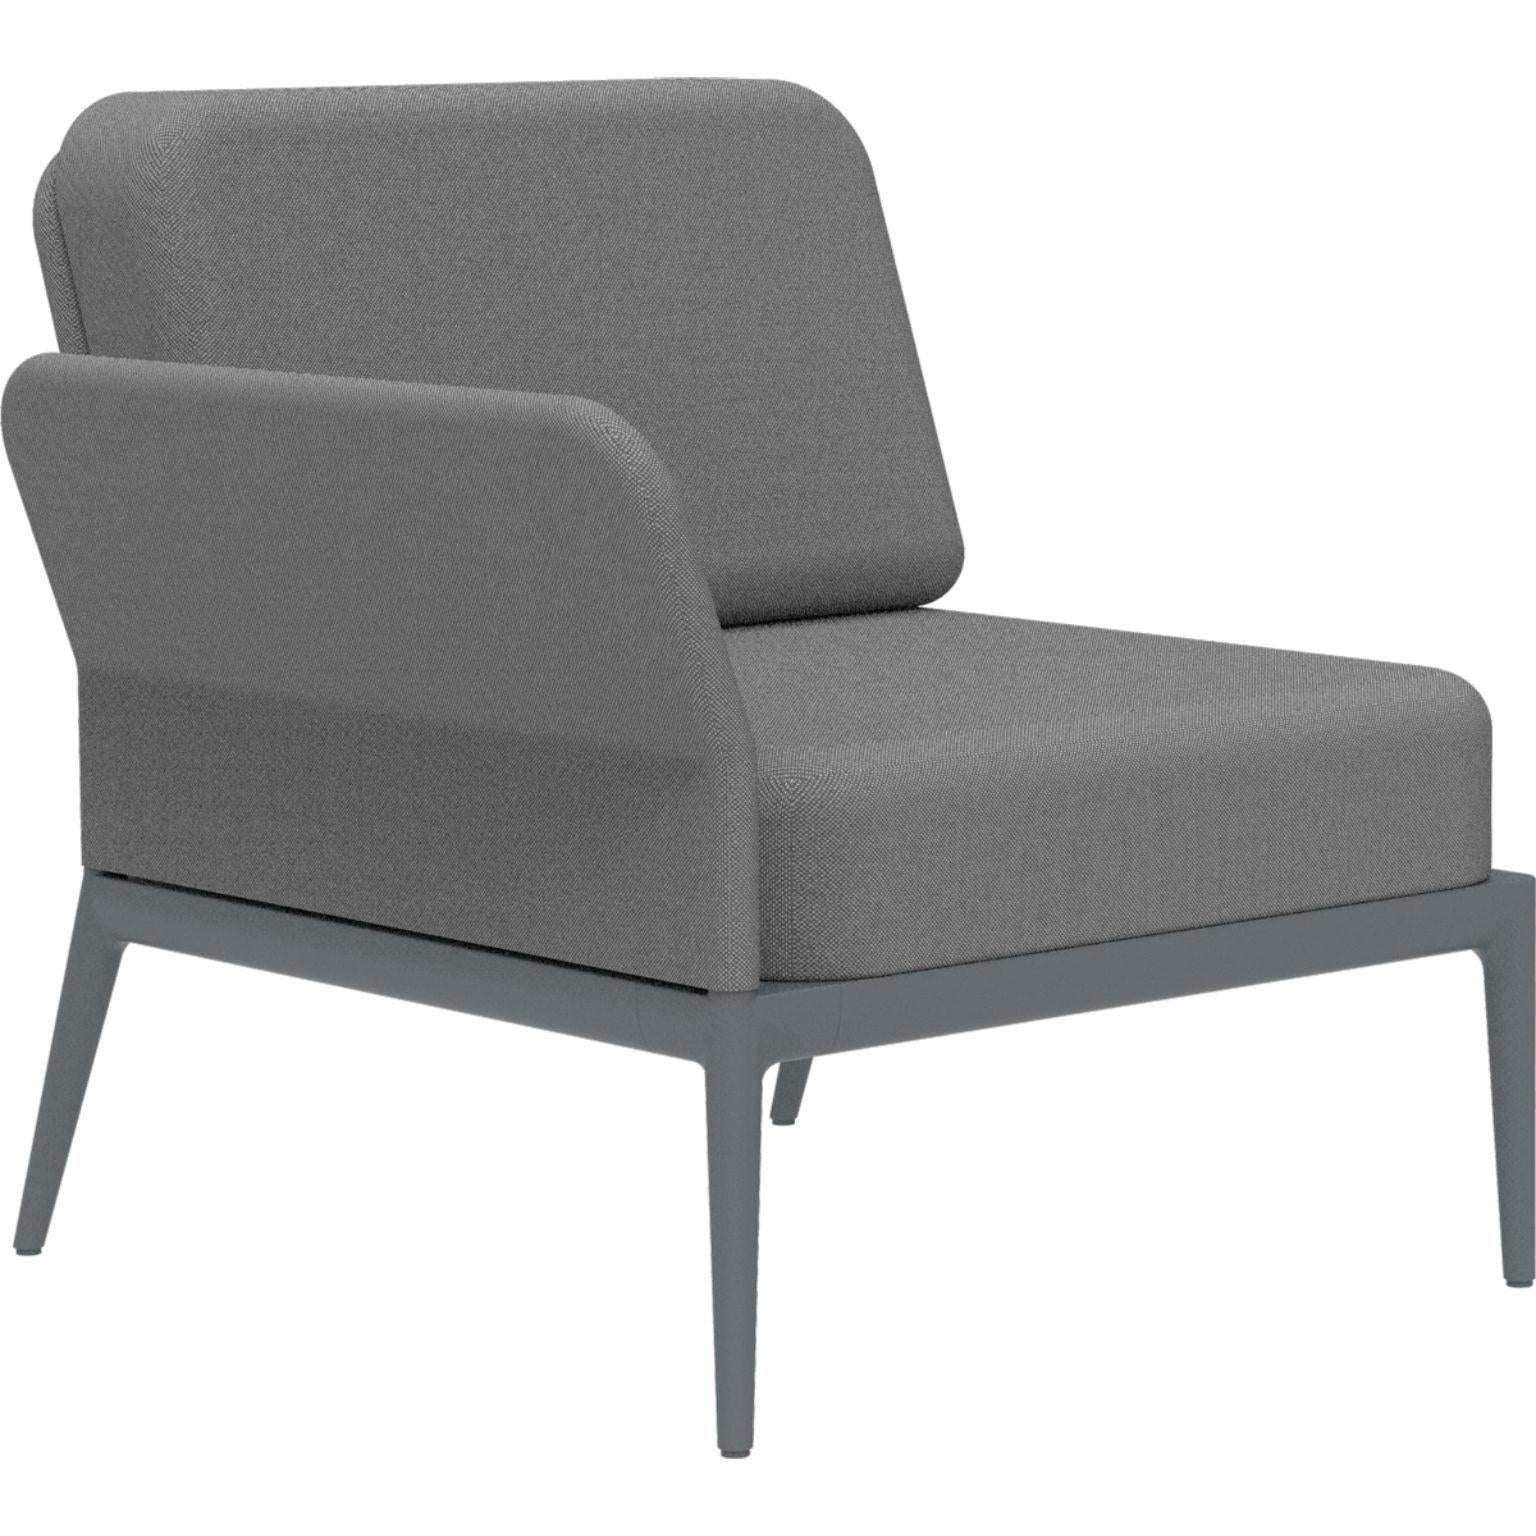 Cover Grey Right Modular Sofa by MOWEE
Dimensions: D83 x W80 x H81 cm (seat height 42 cm).
Material: Aluminum and upholstery. 
Weight: 19 kg.
Also available in different colors and finishes. Please contact us.

An unmistakable collection for